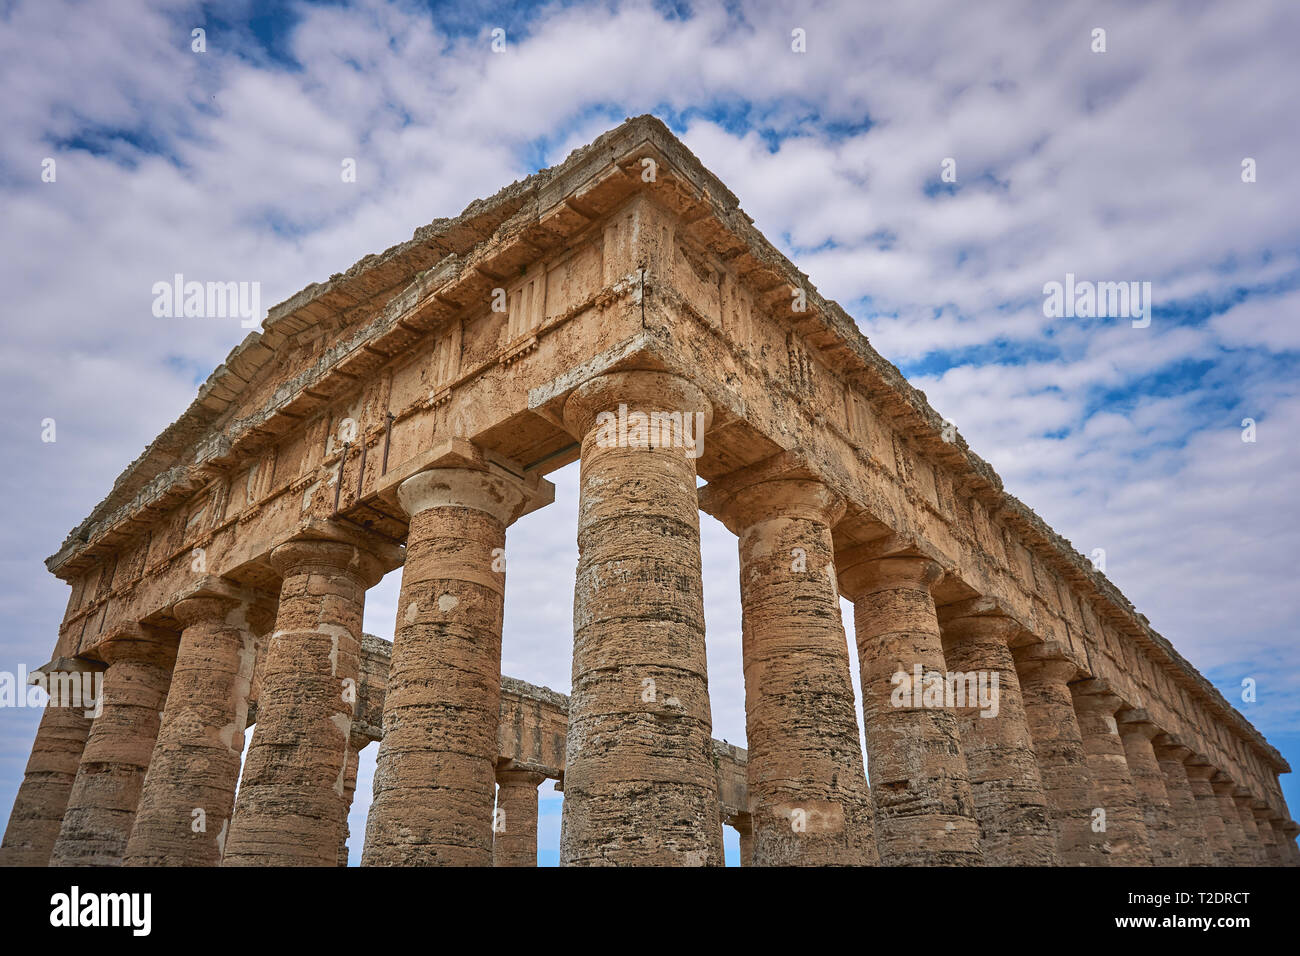 Calatafimi, Italy - October, 2018. The Doric temple of Segesta, on a hill just outside the site of the ancient city. Stock Photo